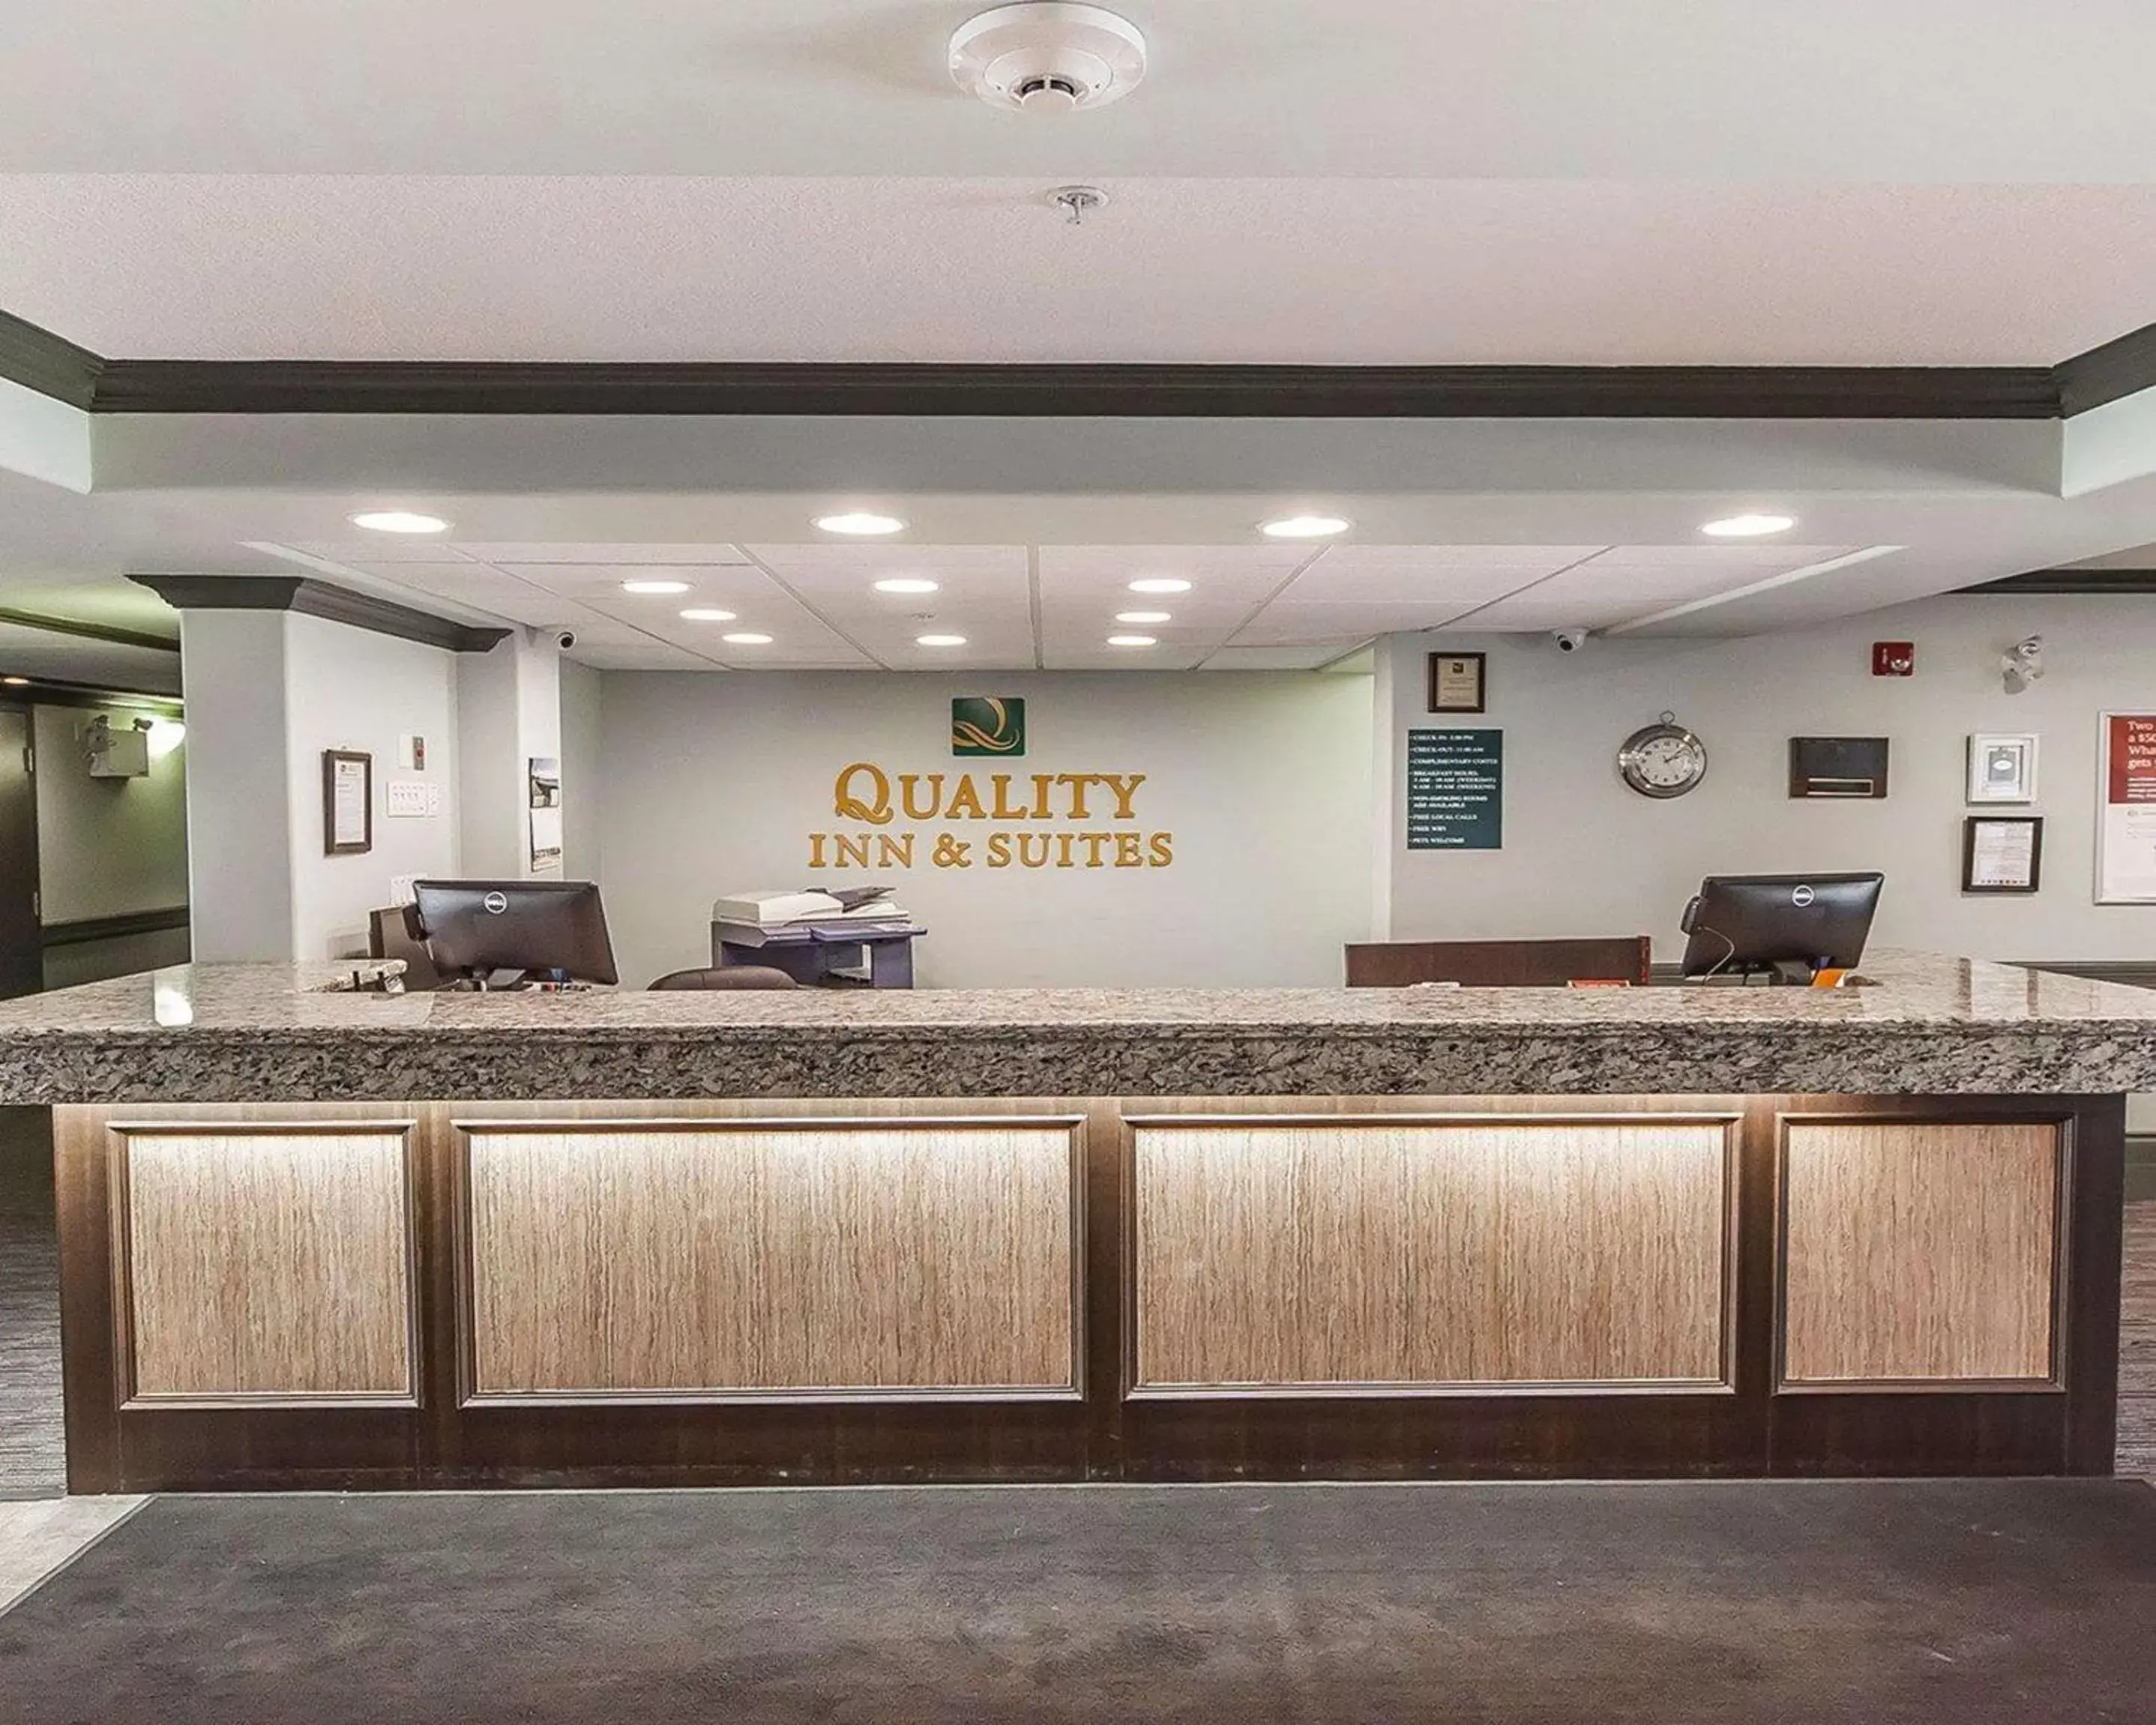 Staff in Quality Inn & Suites Hinton